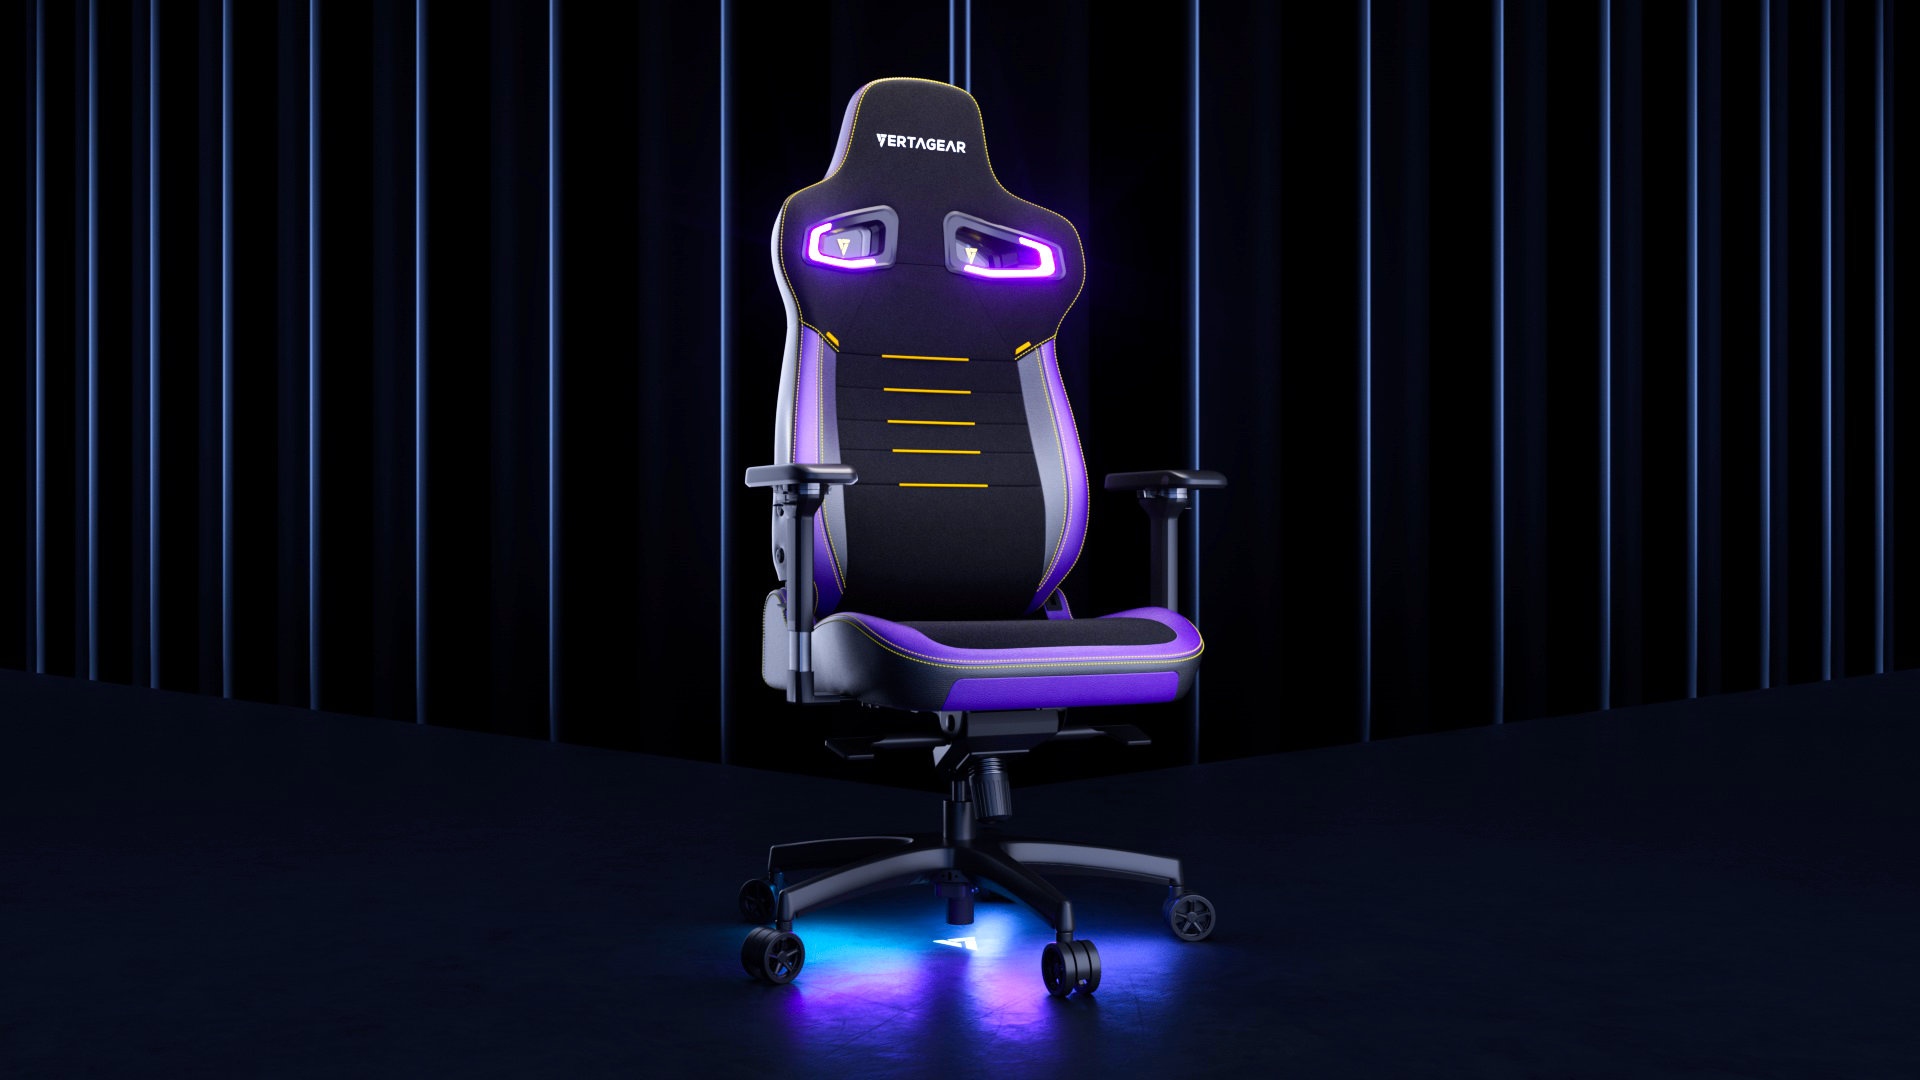 Best gaming chair: Vertagear. Image shows a gaming chair with LED lighting.